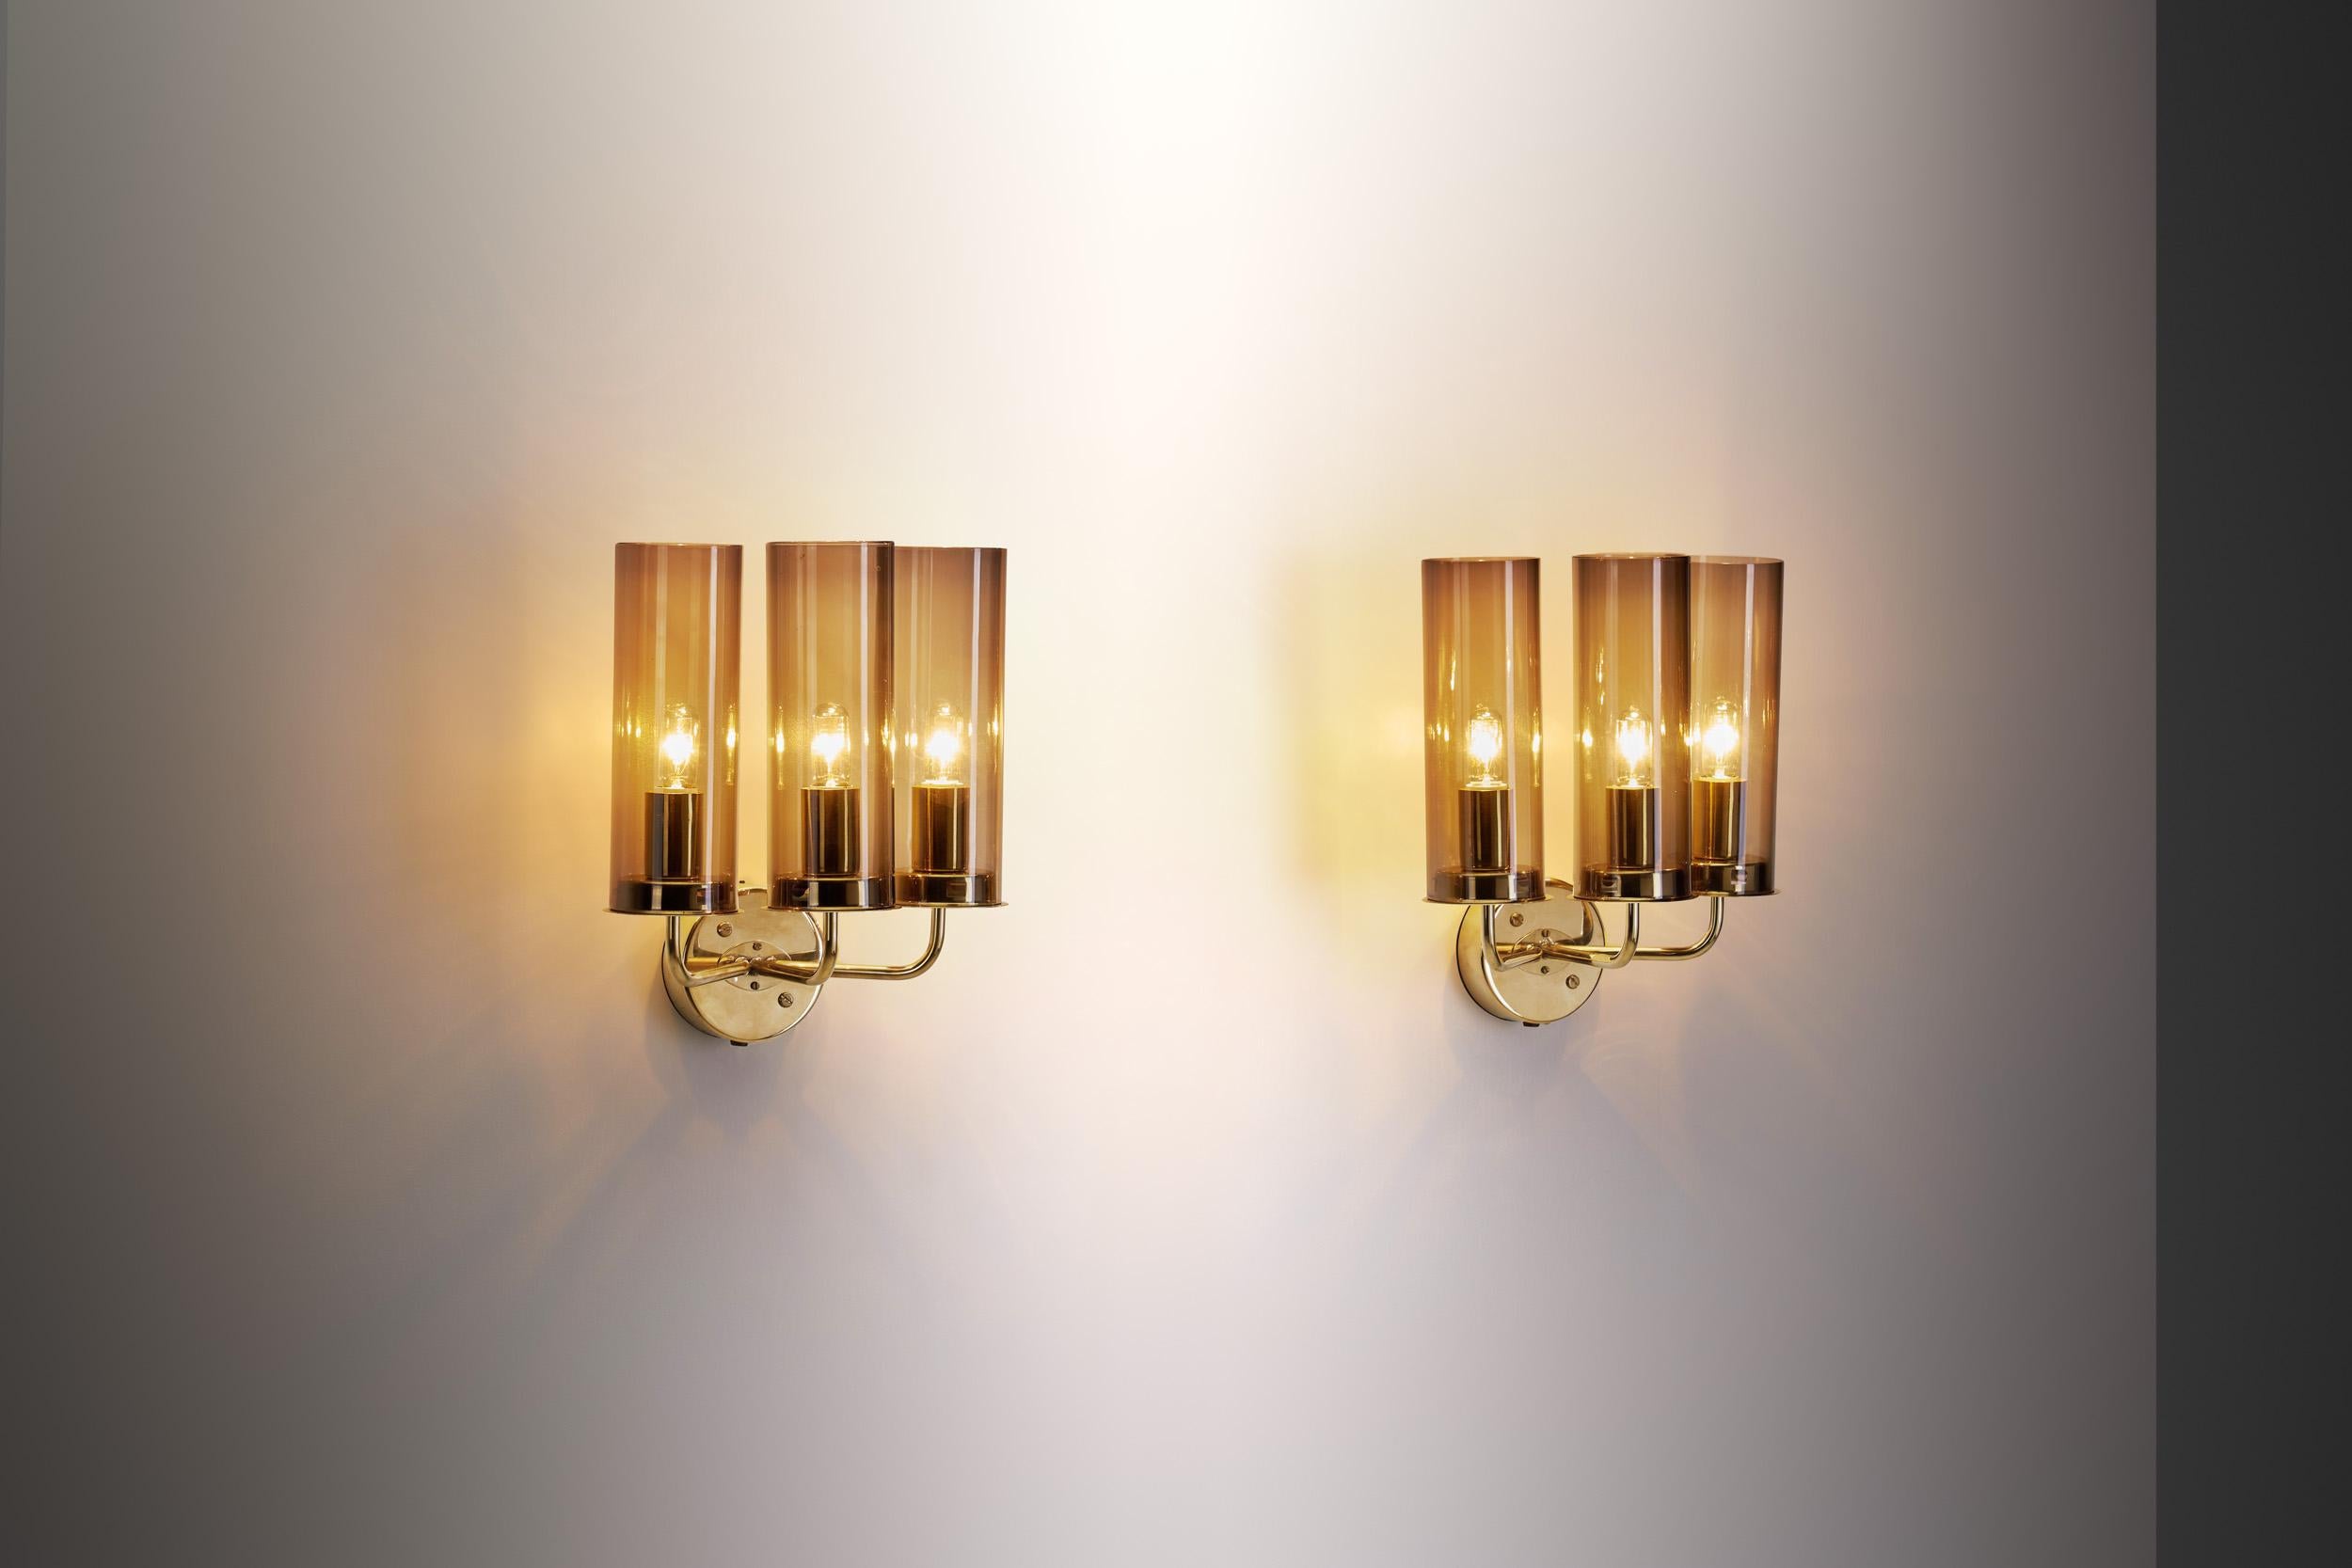 While Hans-Agne Jakobsson designed and produced various types of furniture, his lighting received greater international attention, not without a good reason. As these “V-169/3” wall sconces showcase, the Swedish designer mastered both the direction